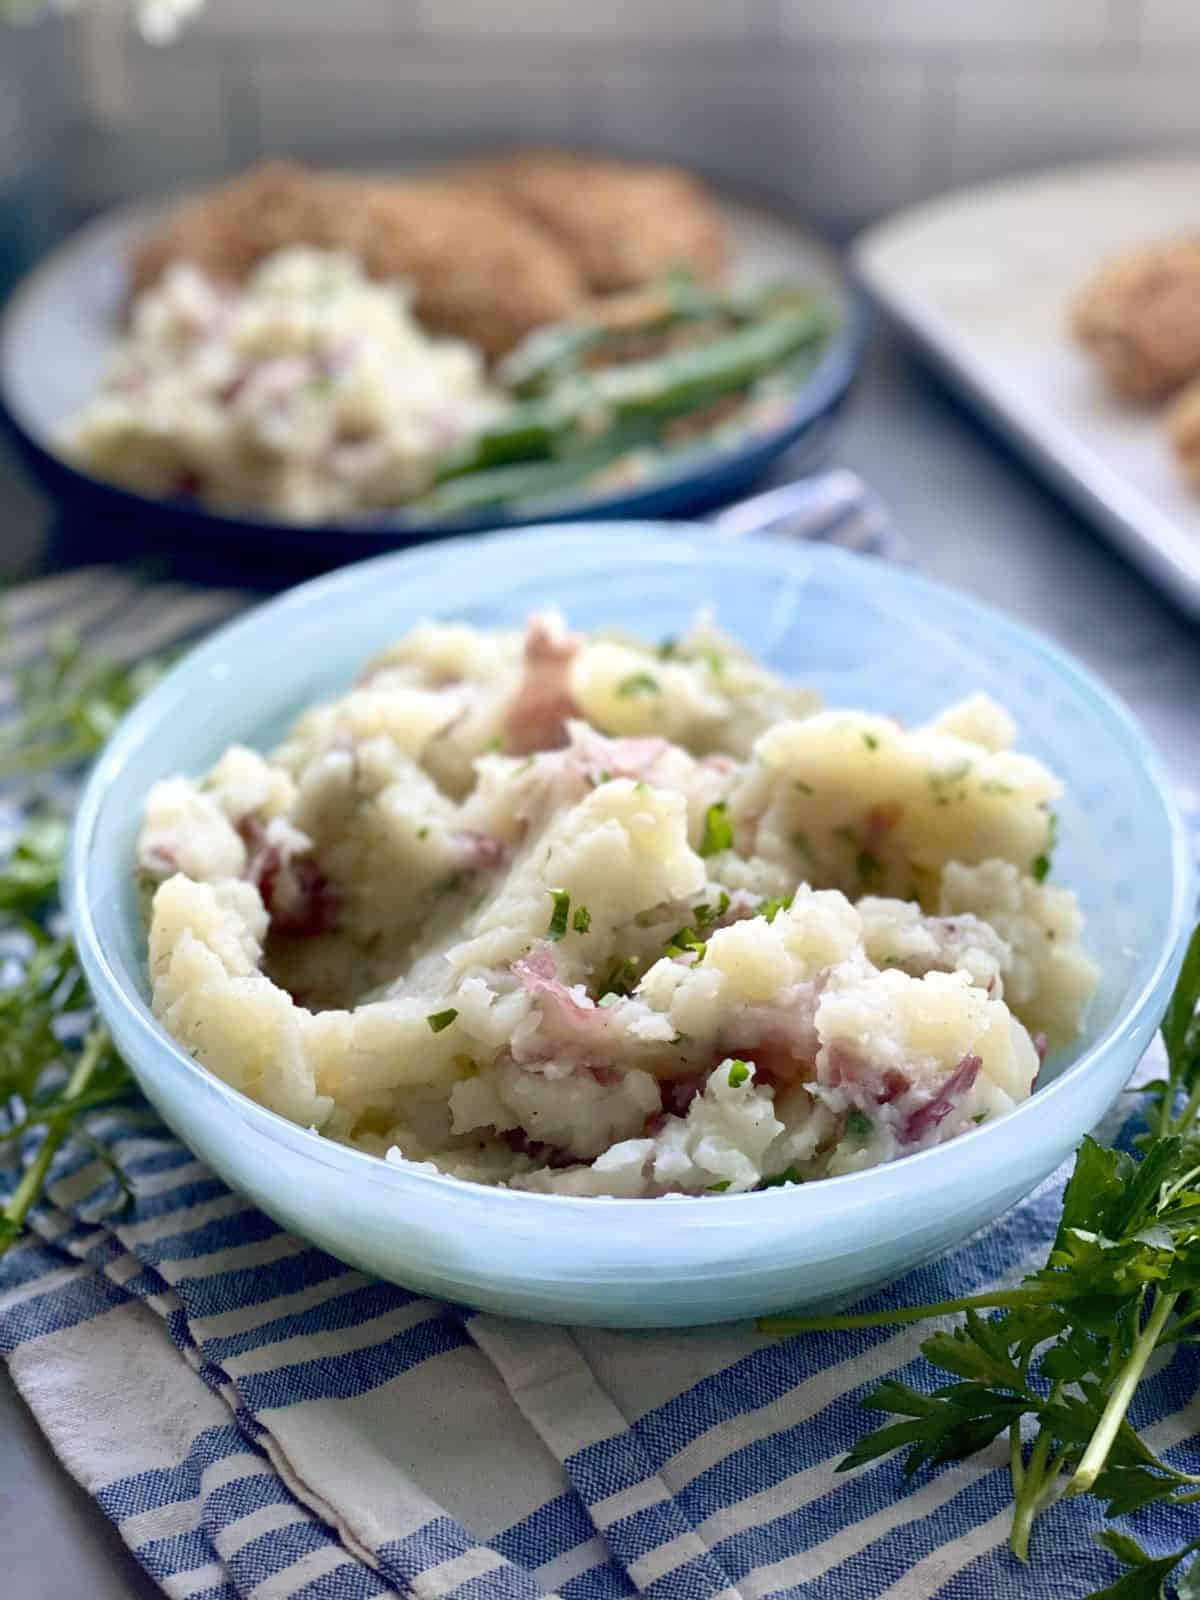 Potato and cauliflower mash in a blue serving dish over a white and blue striped towel